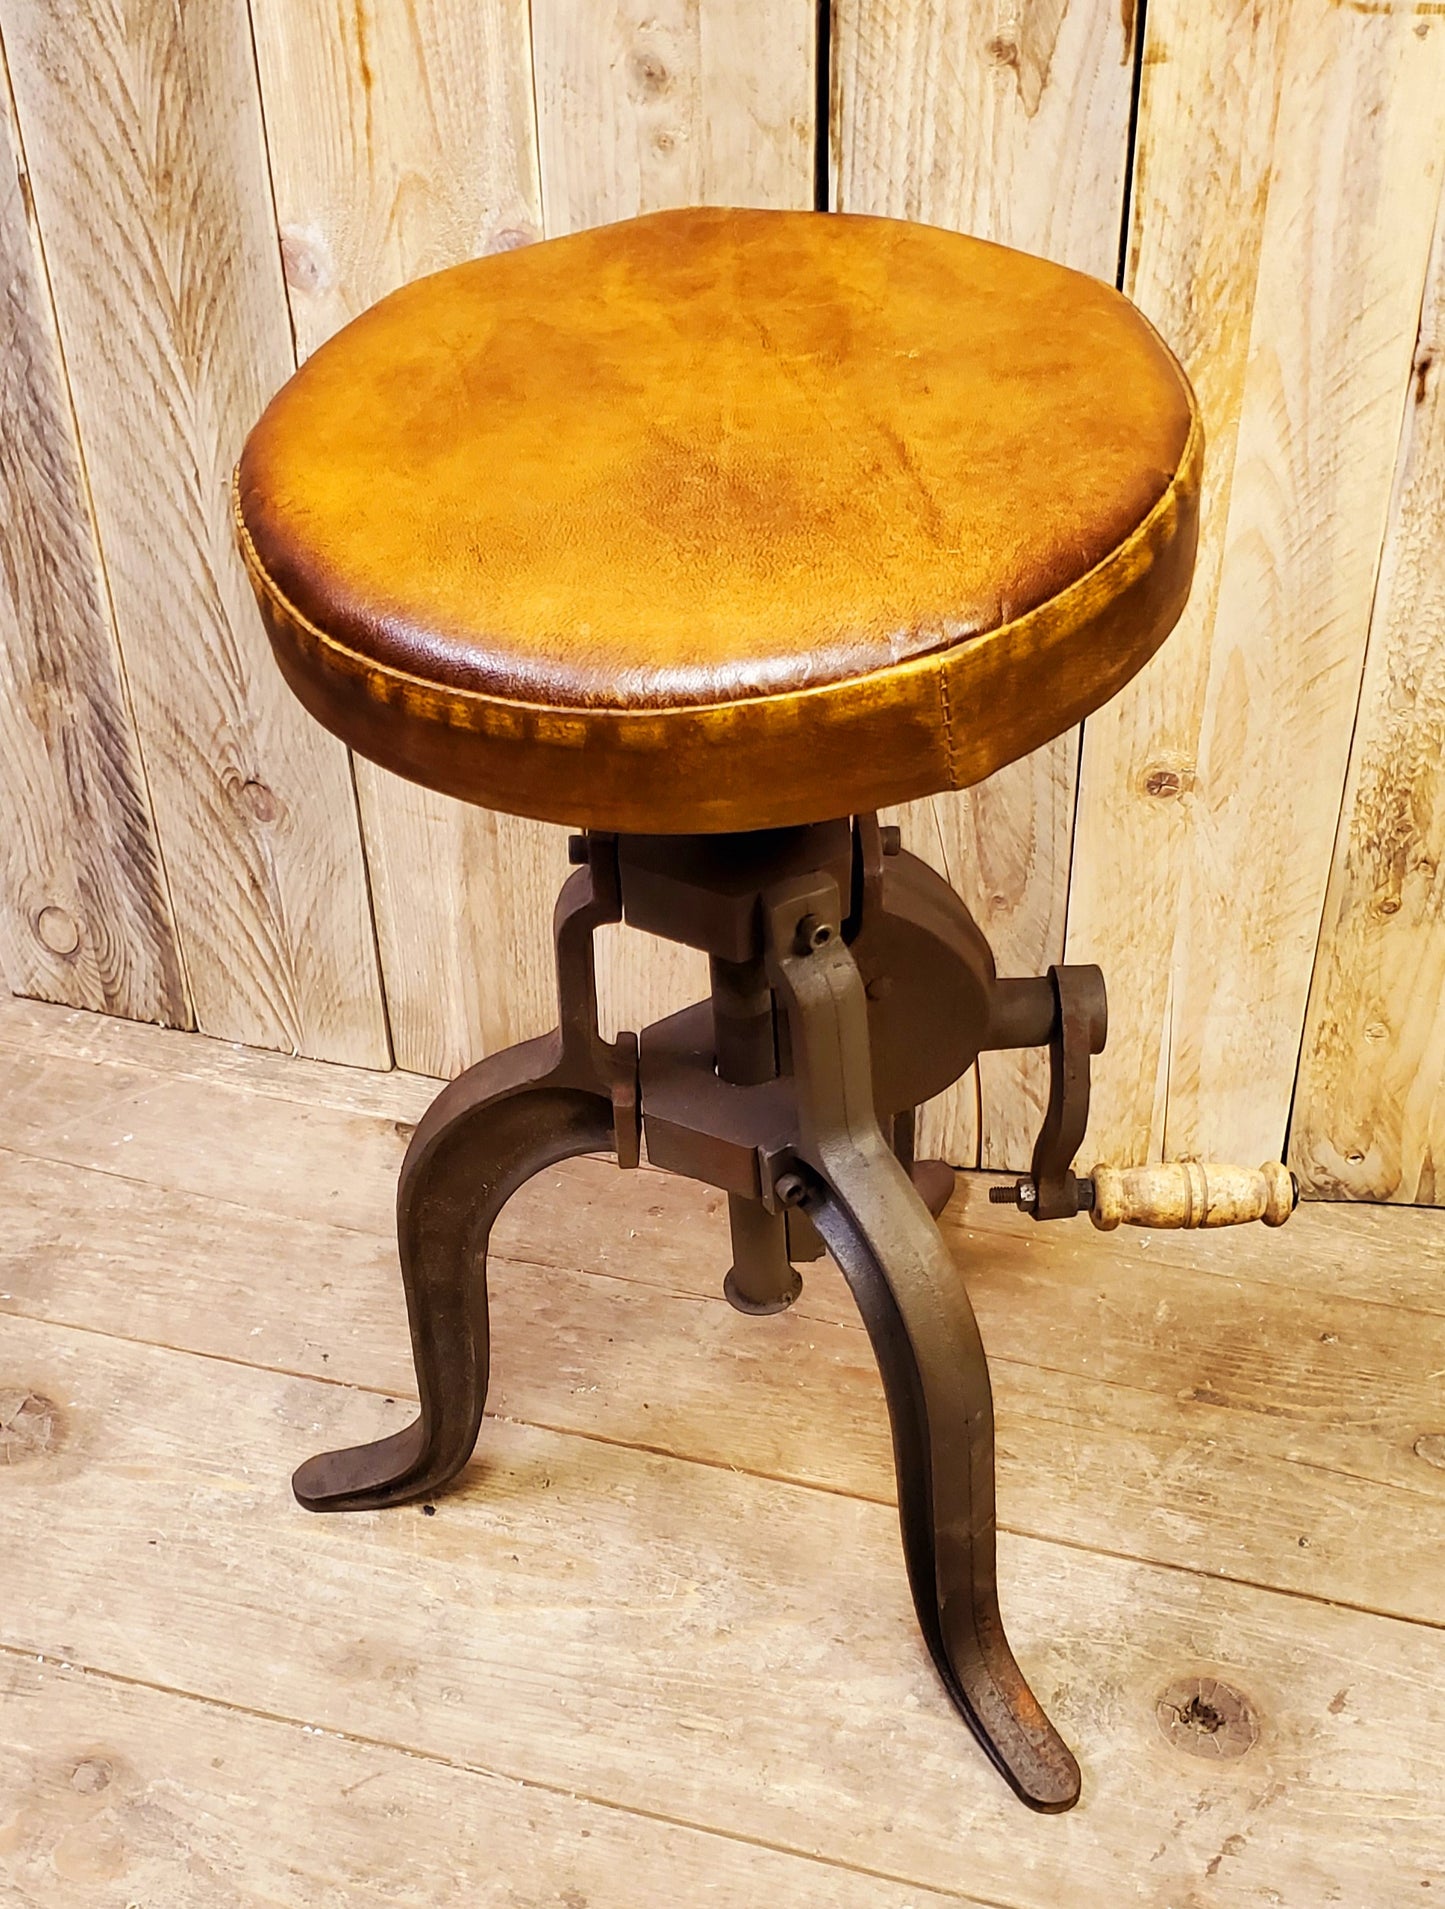 The Abercrombie - Vintage Cast Iron Crank Handle Stool With Leather Seat Top